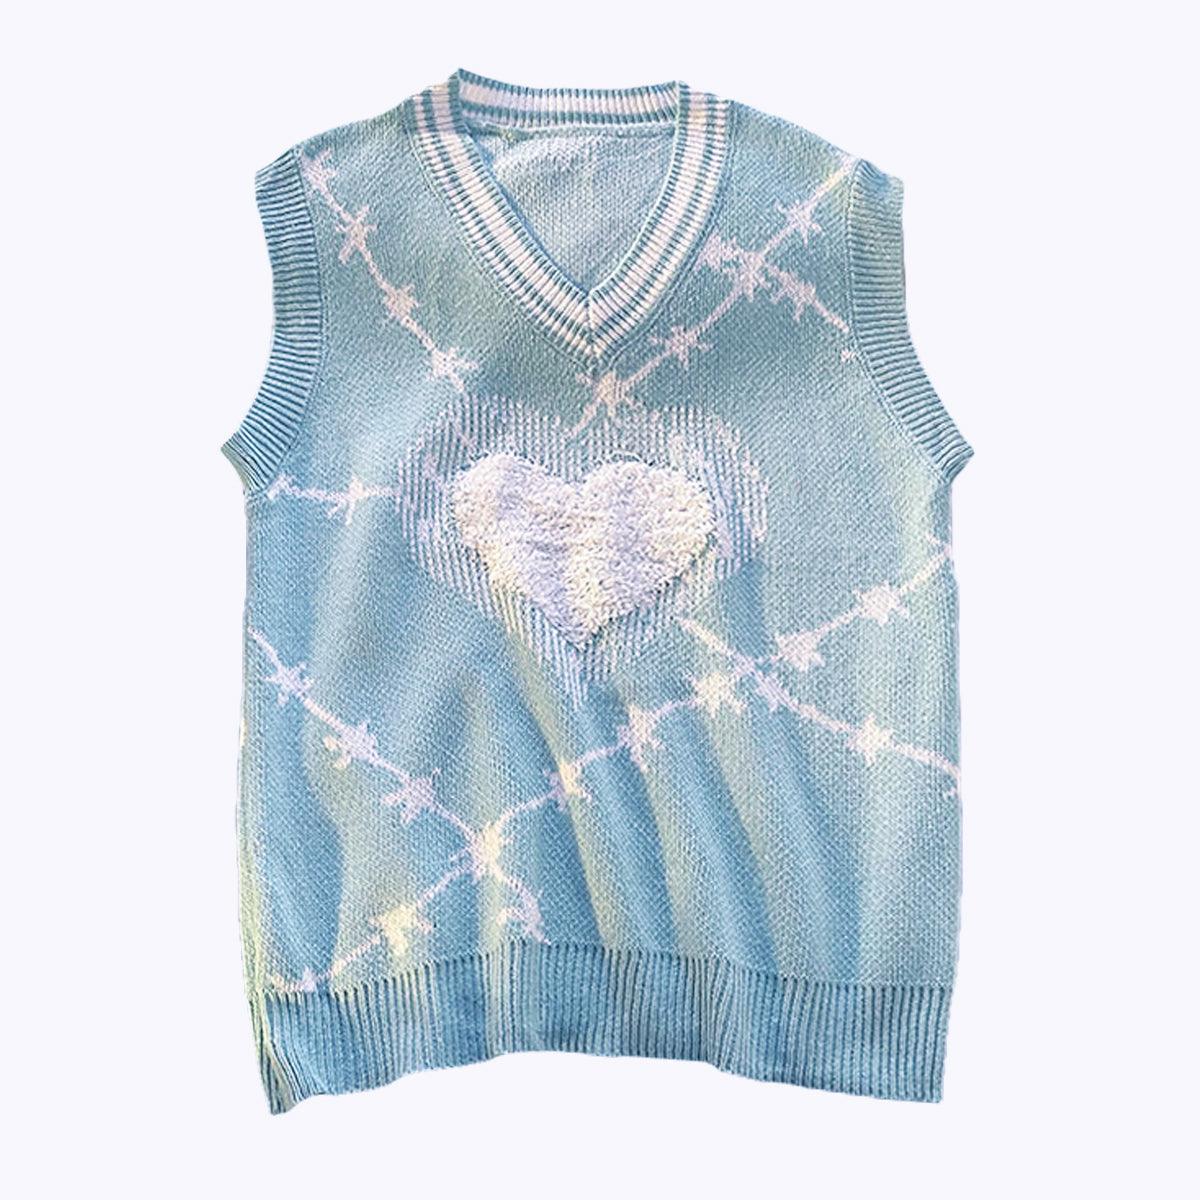 Barbed Wire Knit Vest Grunge Aesthetic - Aesthetic Clothes Shop